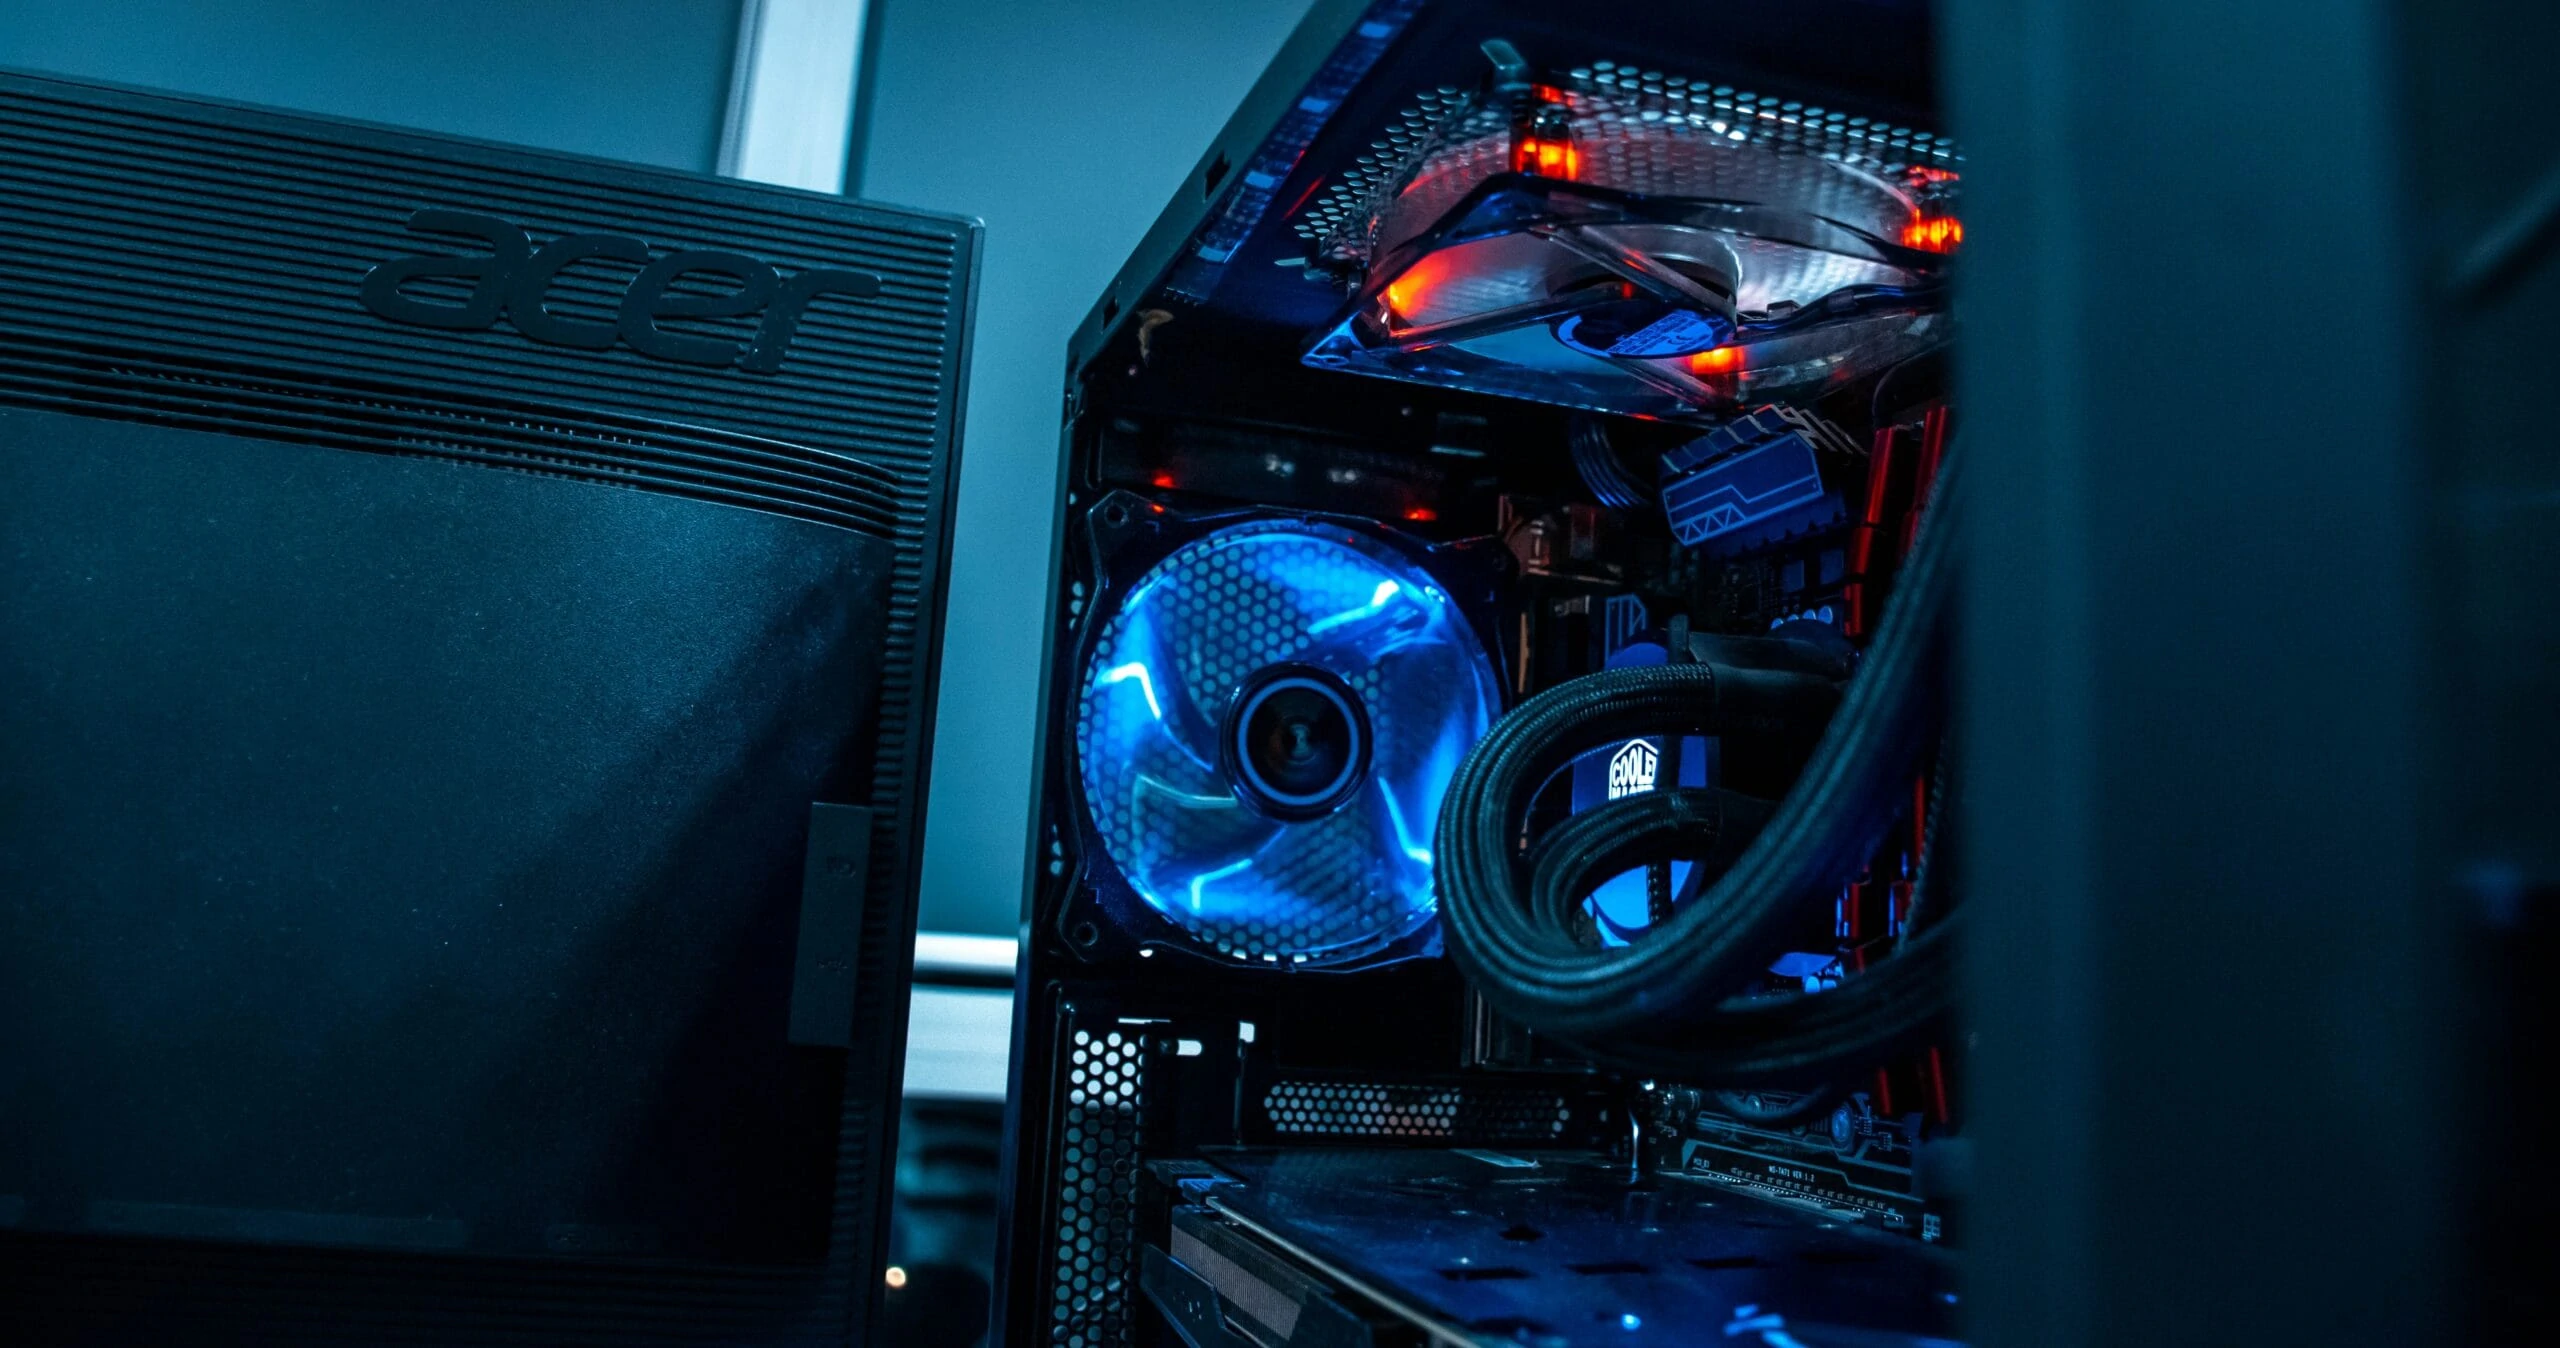 What to Look for in a Gaming PC